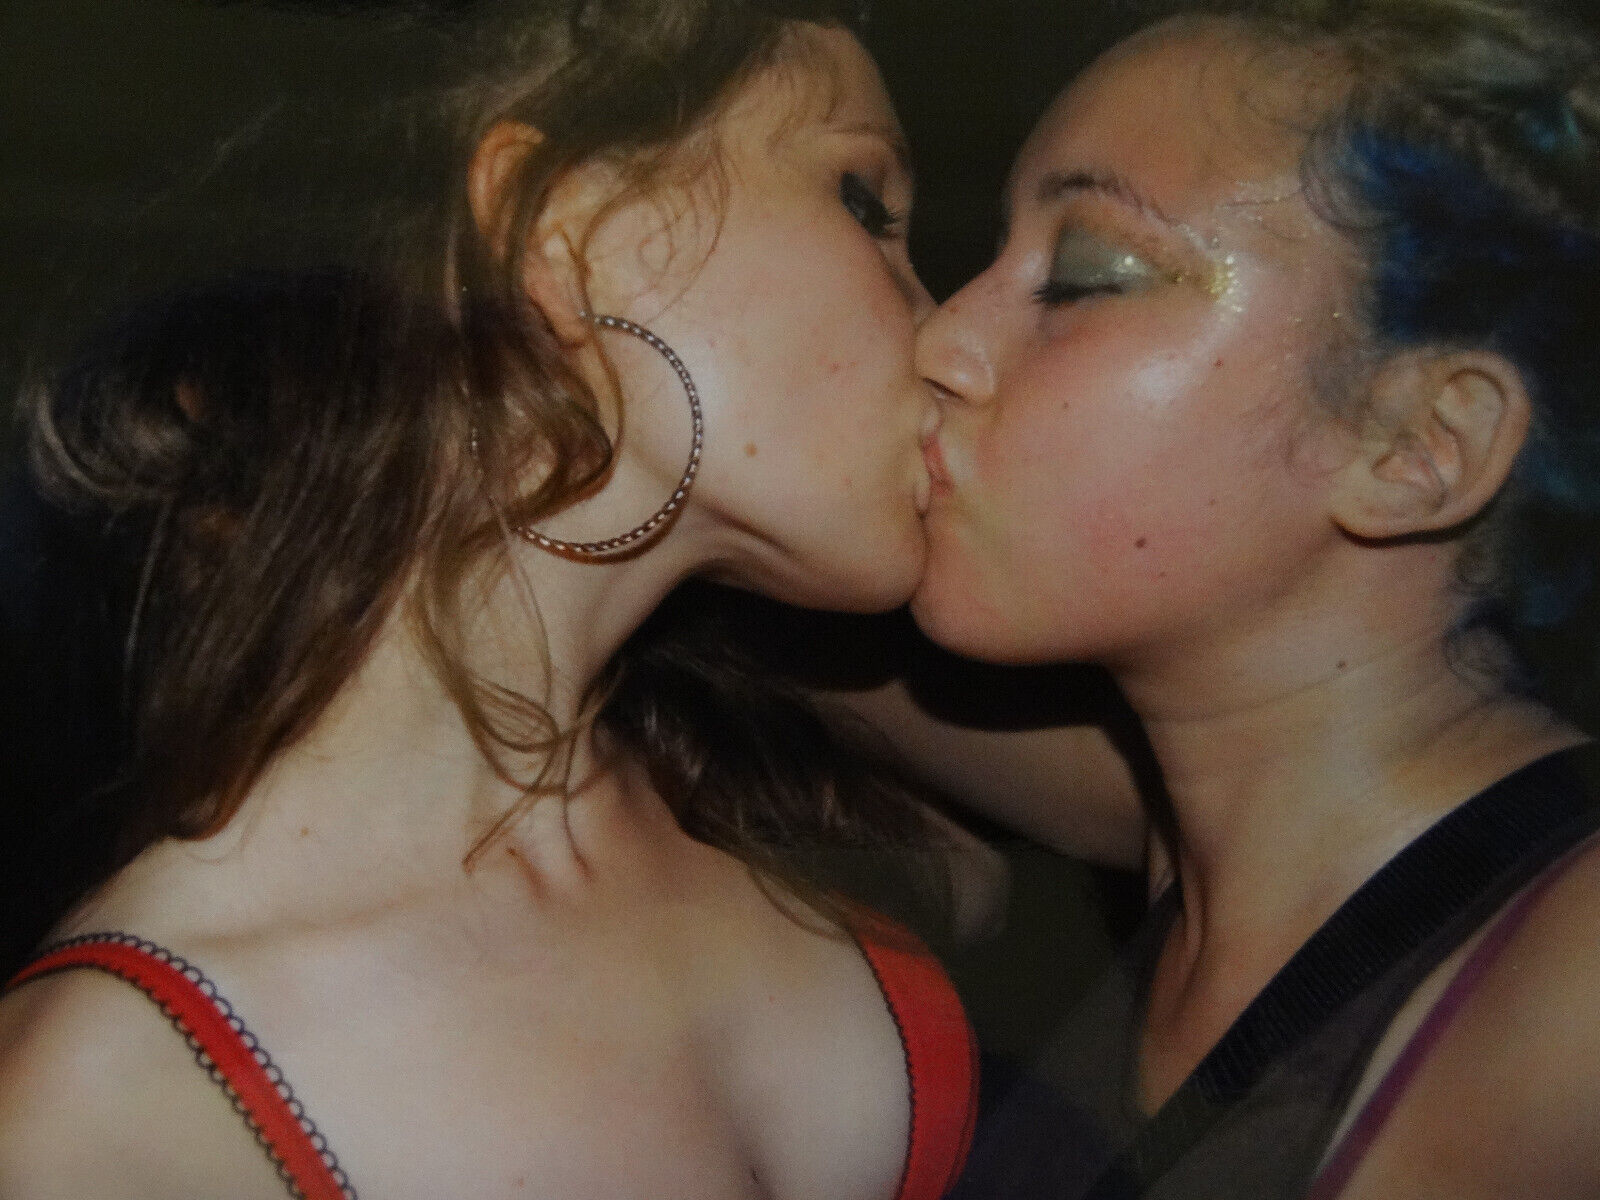 Vintage Found Photo Woman Girls Kissing 2000s Rave Busty Lesbian Interest GAY